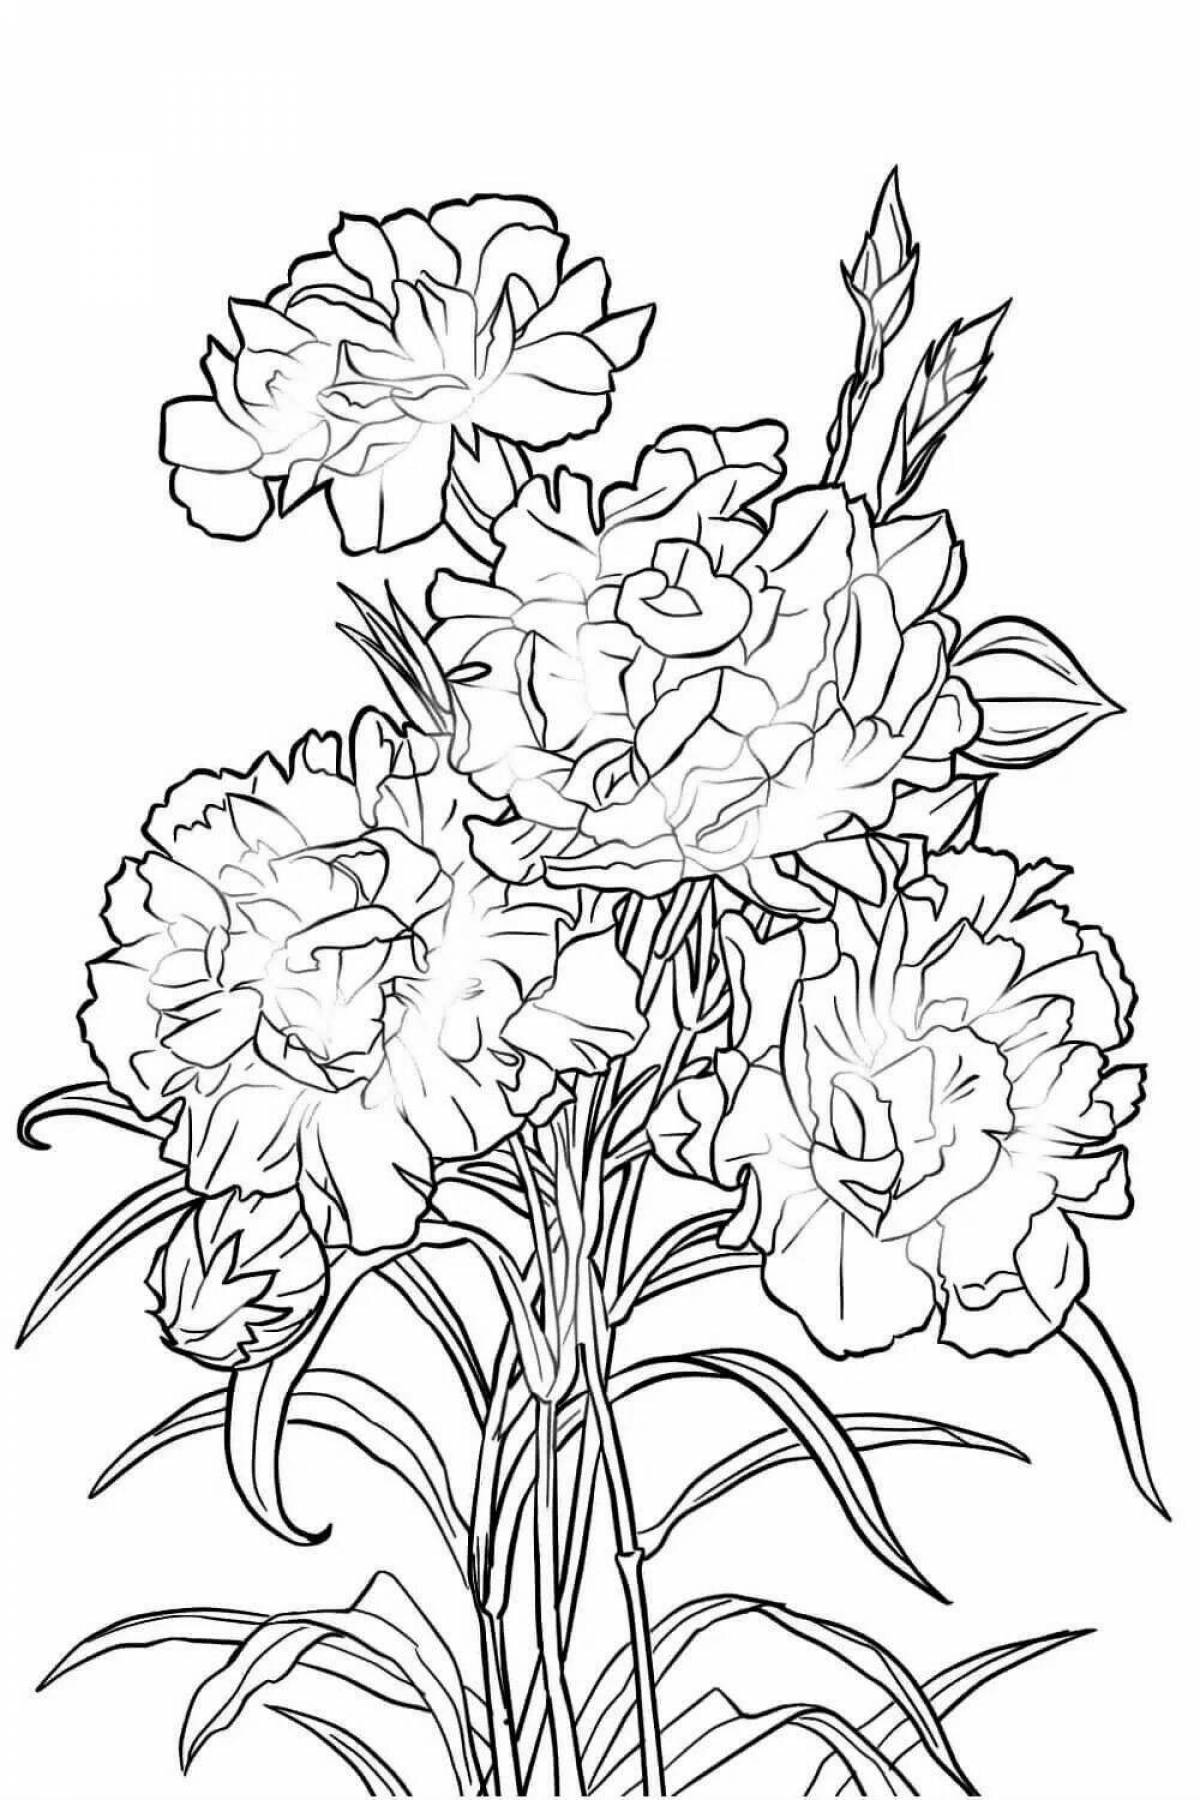 Coloring book shining colorful bouquet of carnations